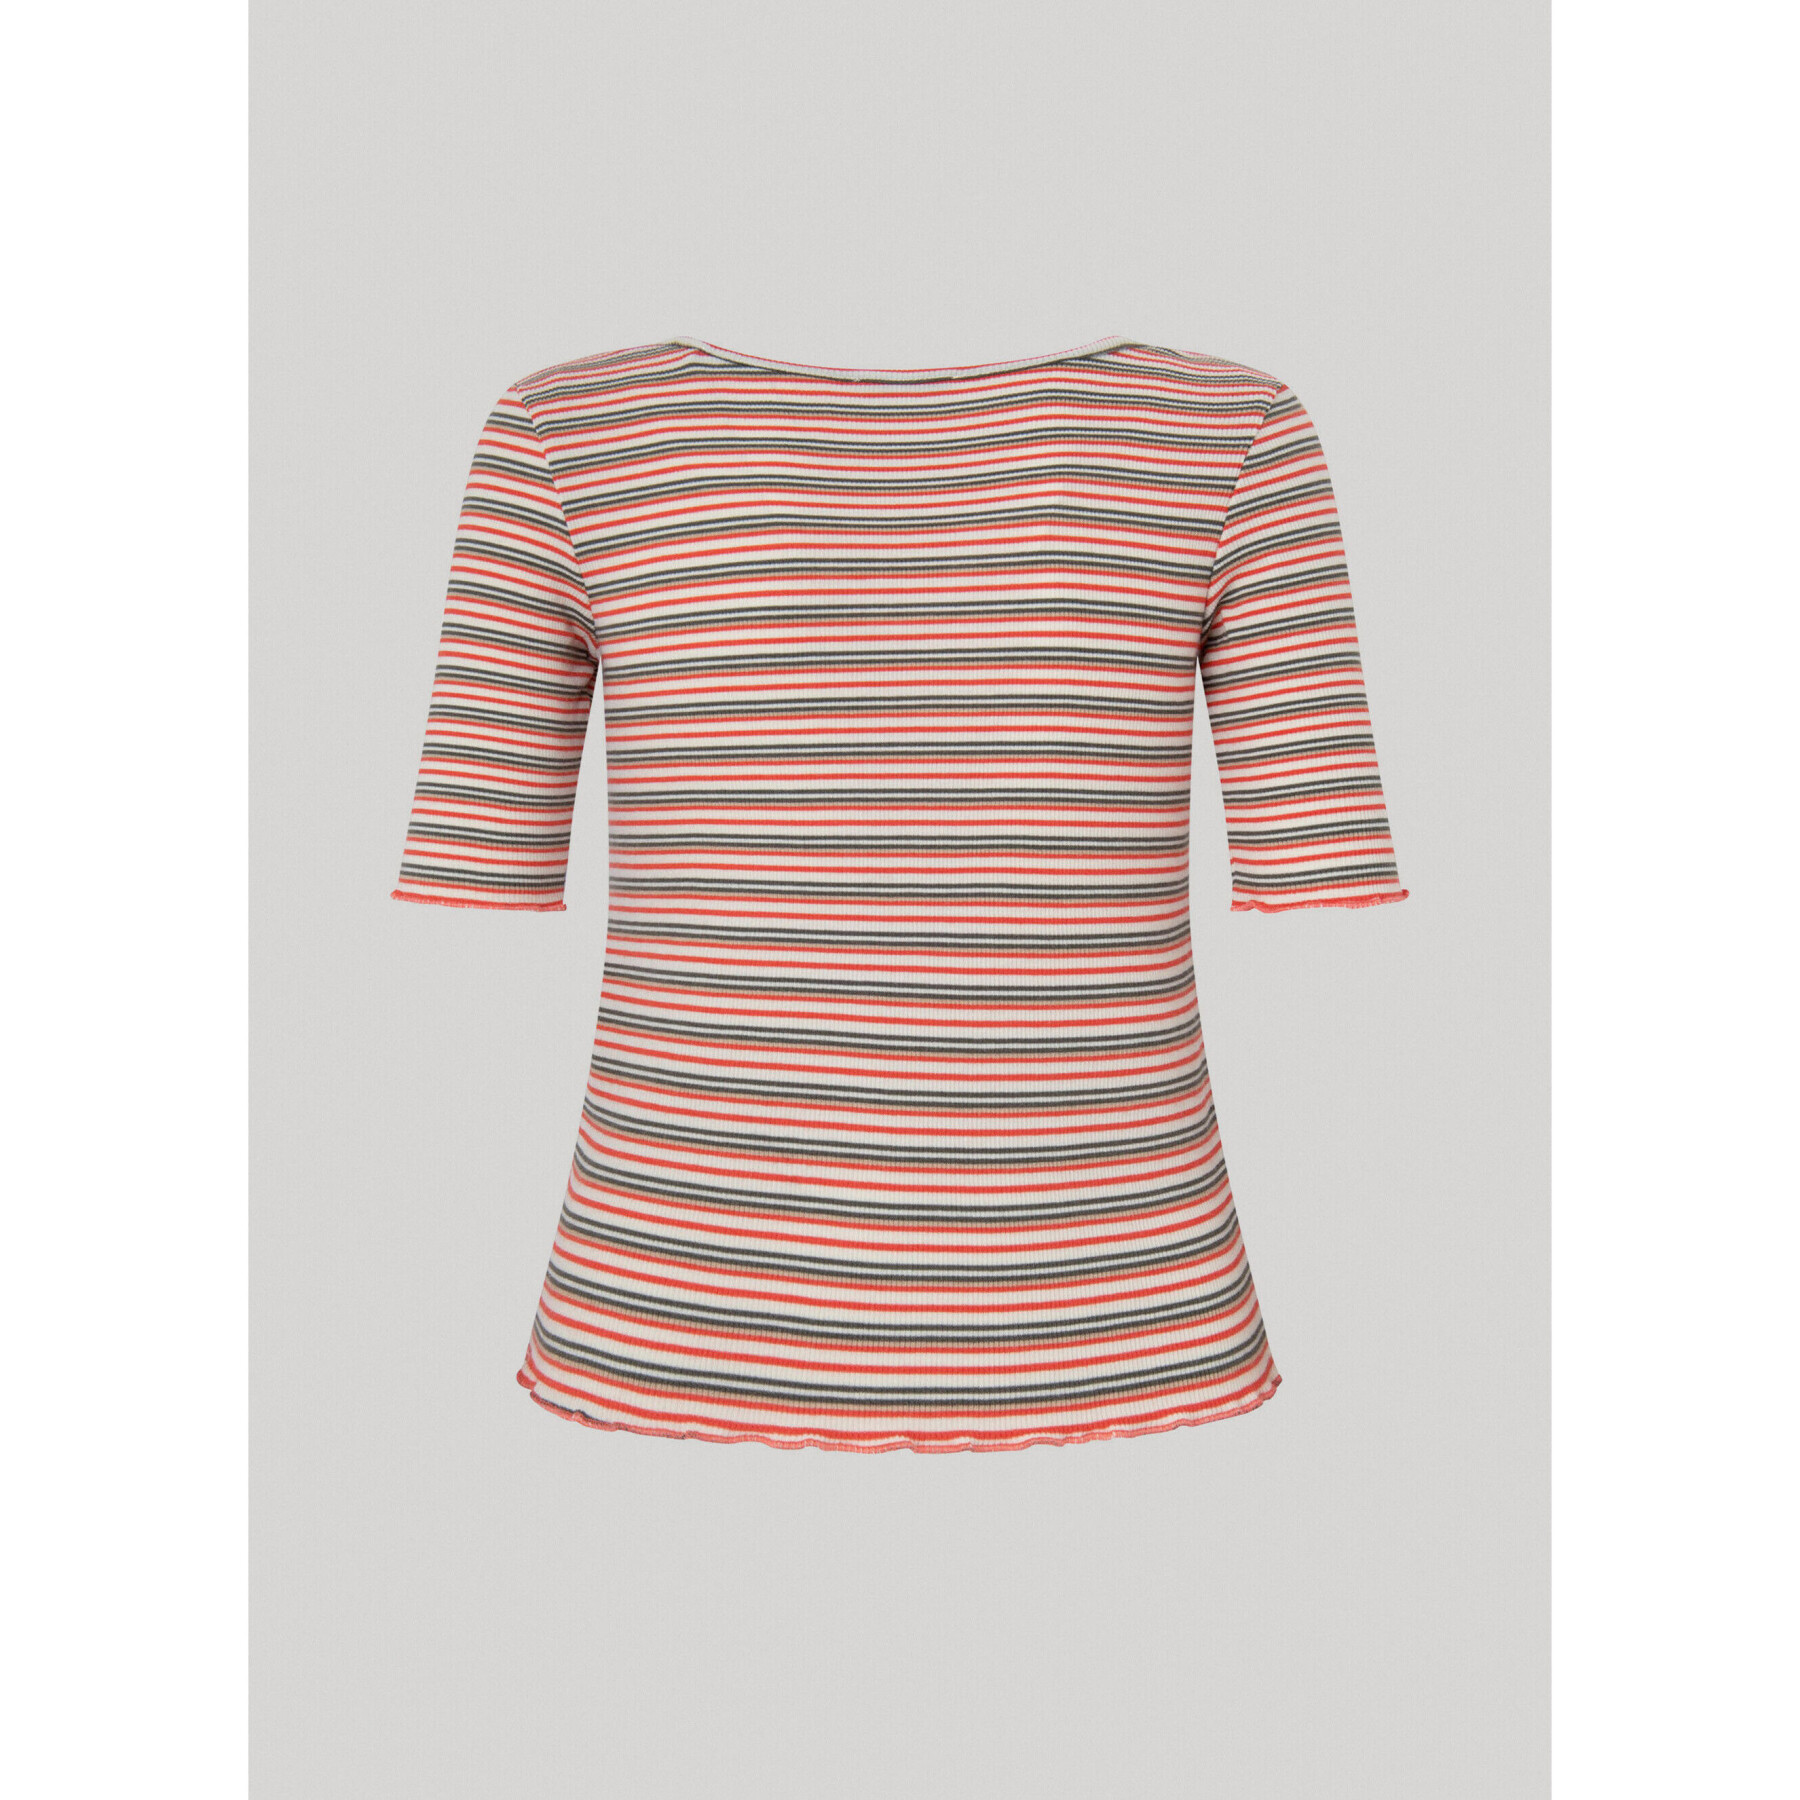 Camiseta de mujer Pepe Jeans Holly